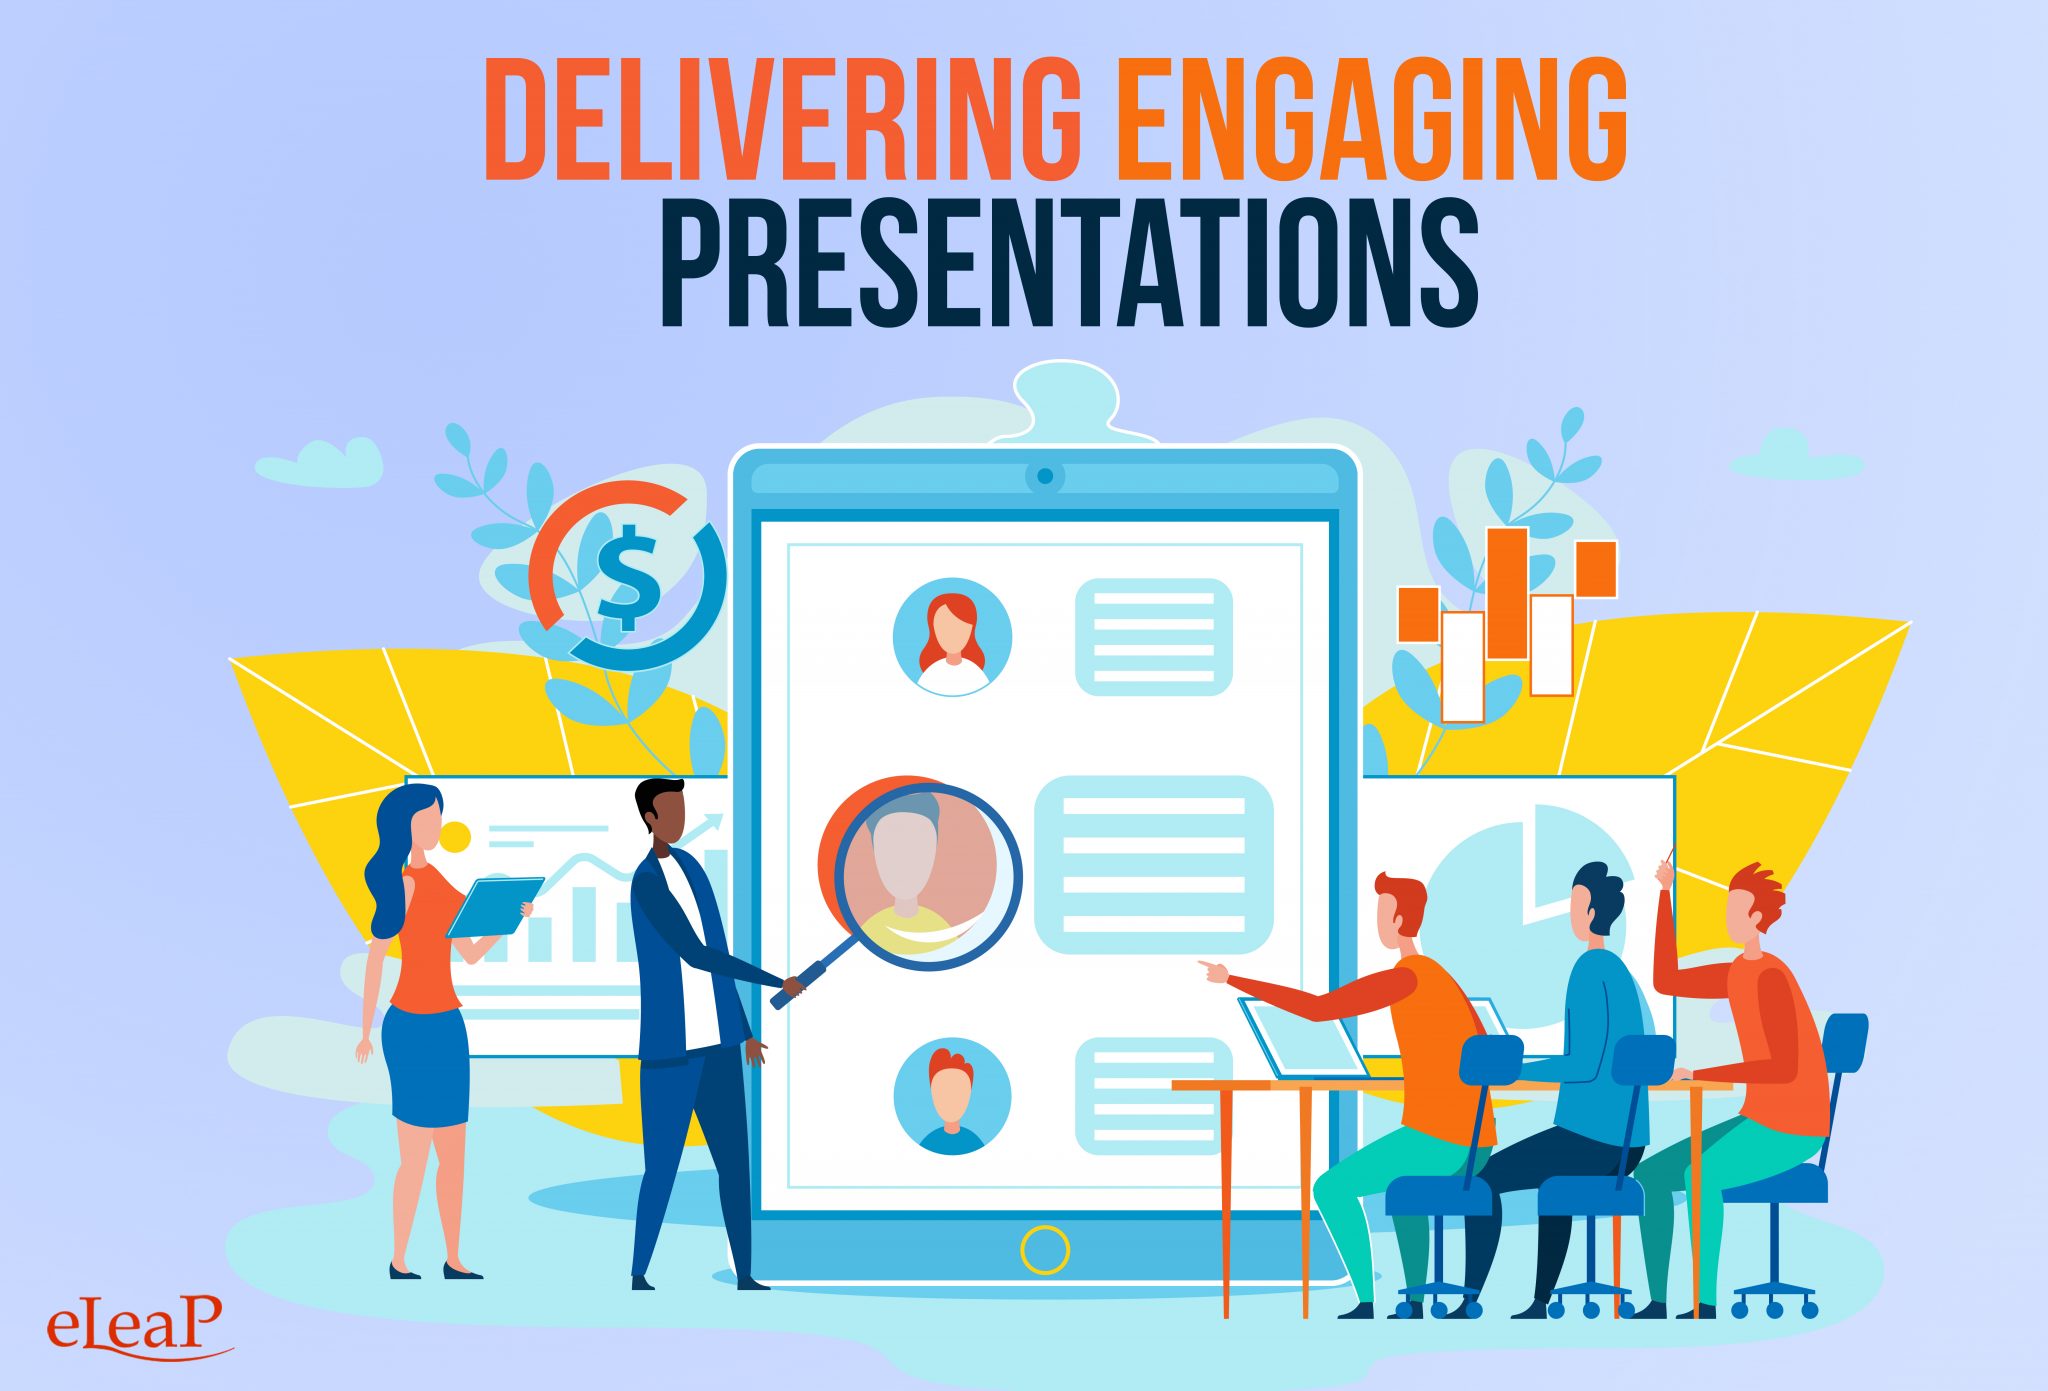 how to make presentations engaging